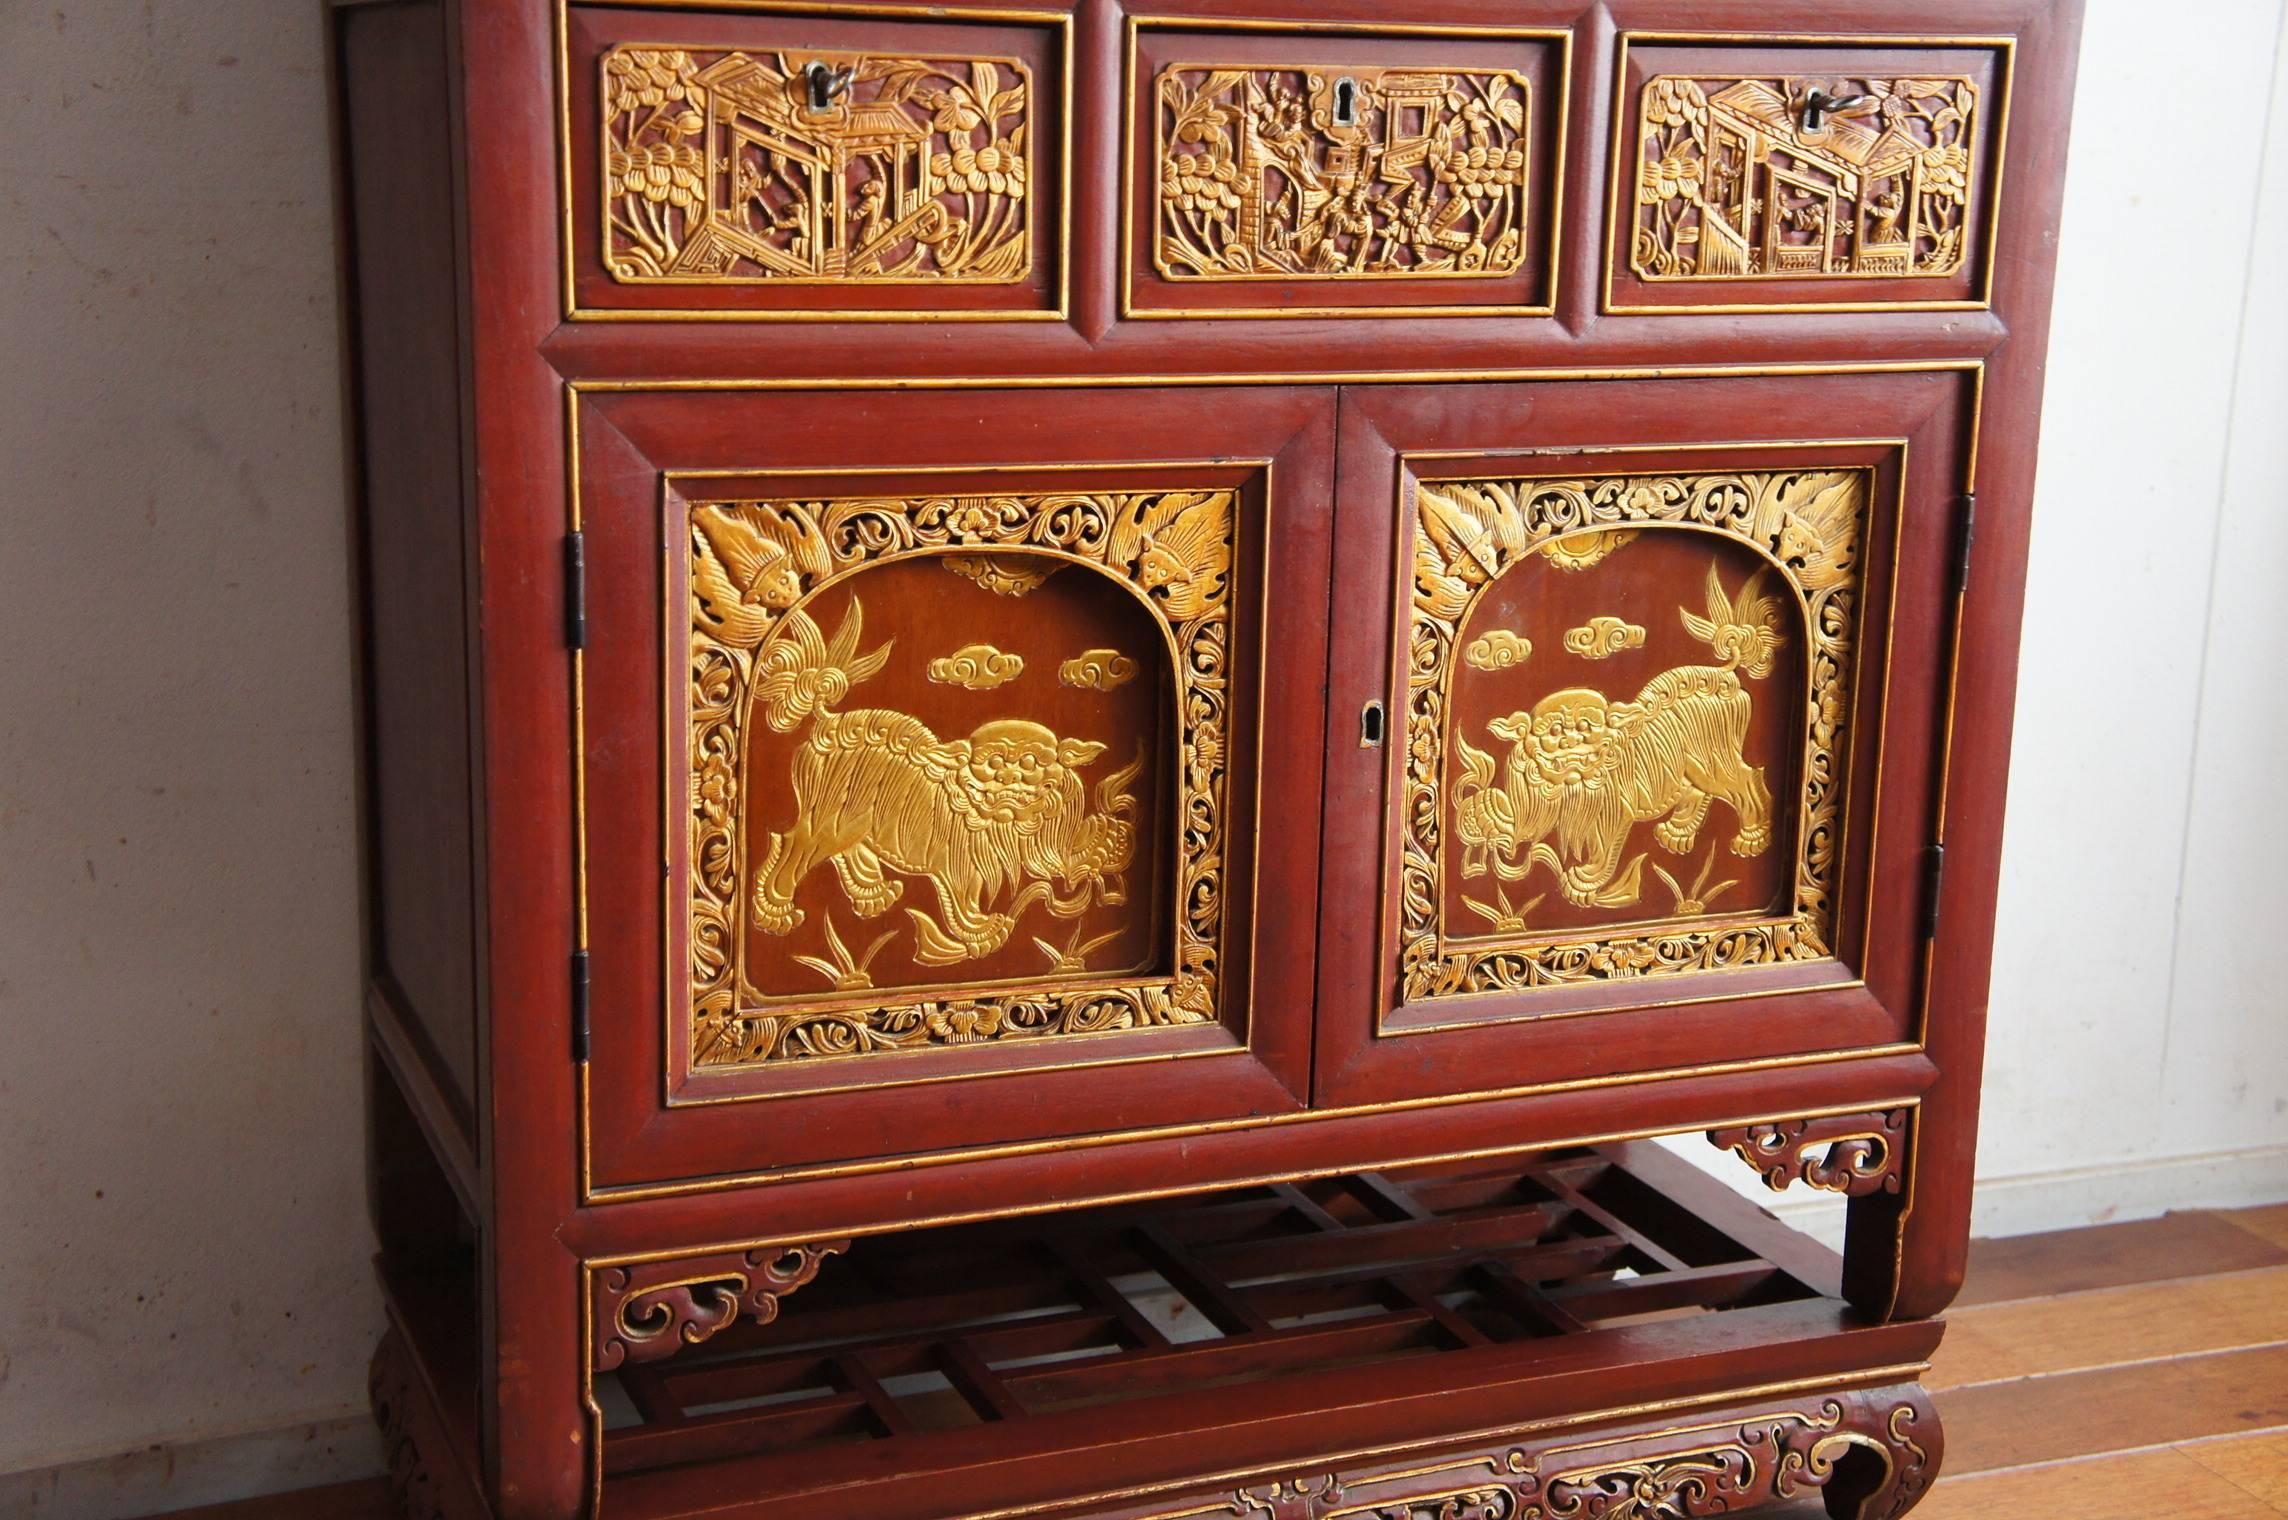 Indonesian Rare 19th Century Hand-Carved & Red Laquered Cabinet with Golden Decor Sumatra